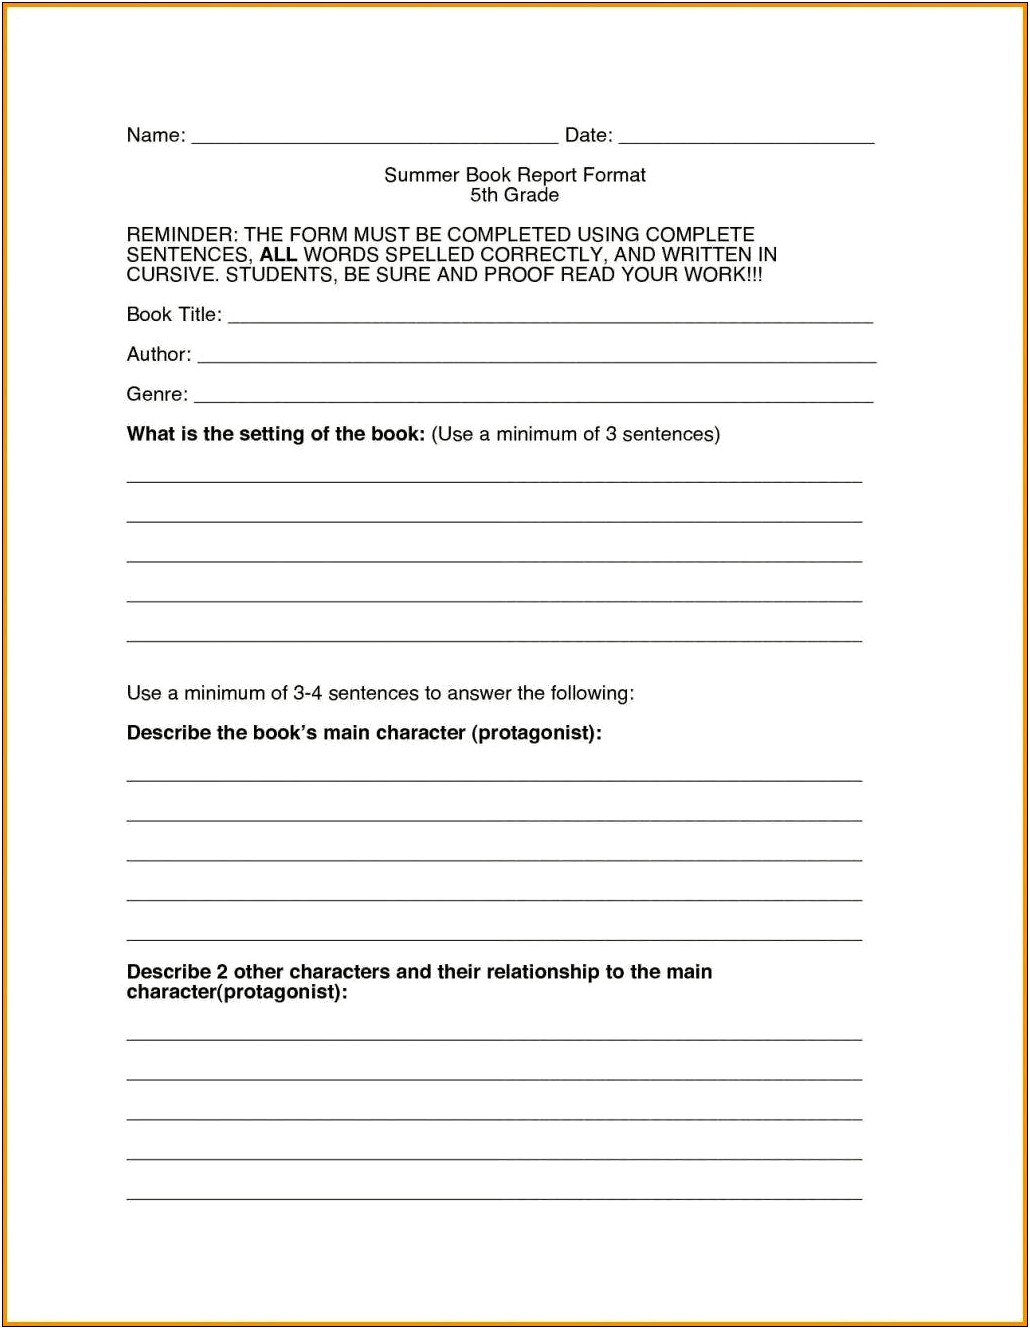 patient-home-sight-review-template-free-printable-templates-resume